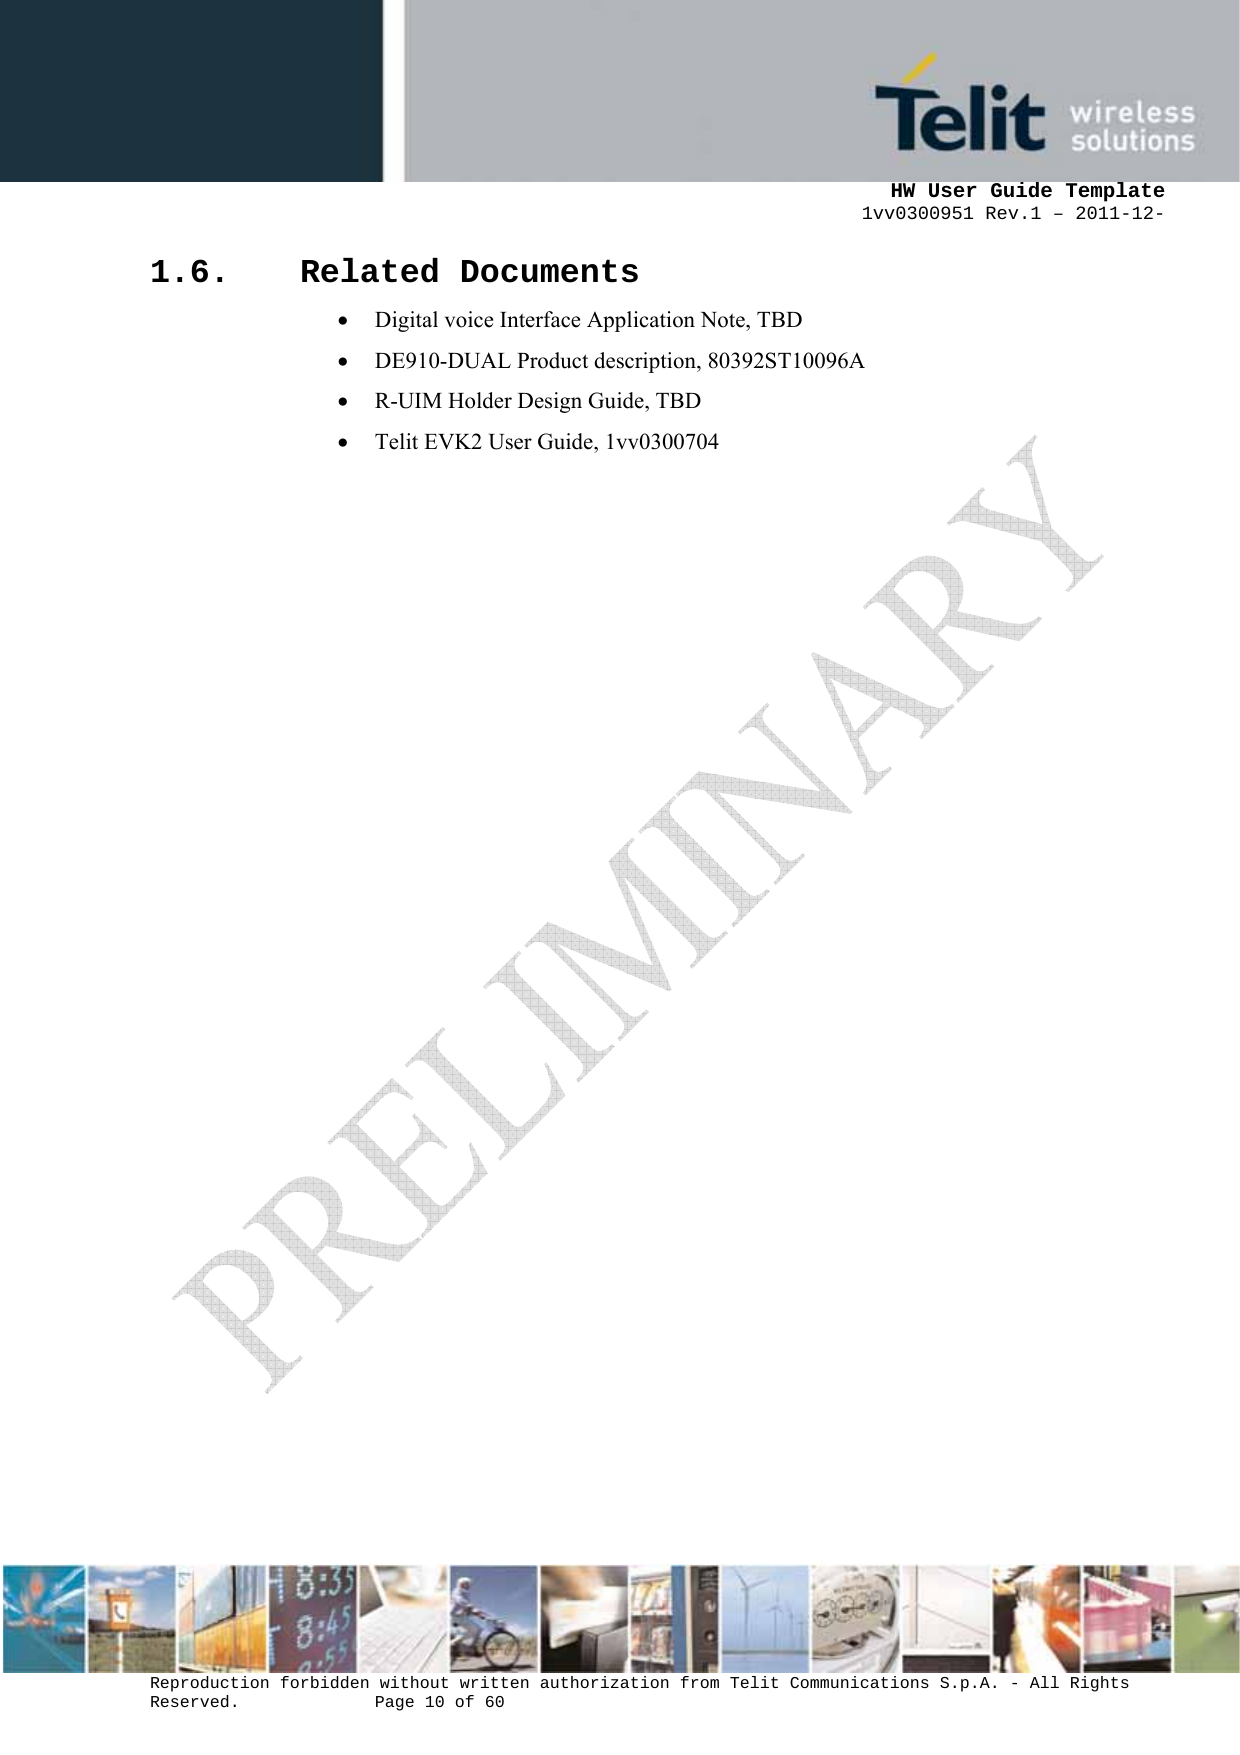      HW User Guide Template 1vv0300951 Rev.1 – 2011-12-  Reproduction forbidden without written authorization from Telit Communications S.p.A. - All Rights Reserved.    Page 10 of 60                                                     1.6. Related Documents • Digital voice Interface Application Note, TBD    • DE910-DUAL Product description, 80392ST10096A • R-UIM Holder Design Guide, TBD • Telit EVK2 User Guide, 1vv0300704     